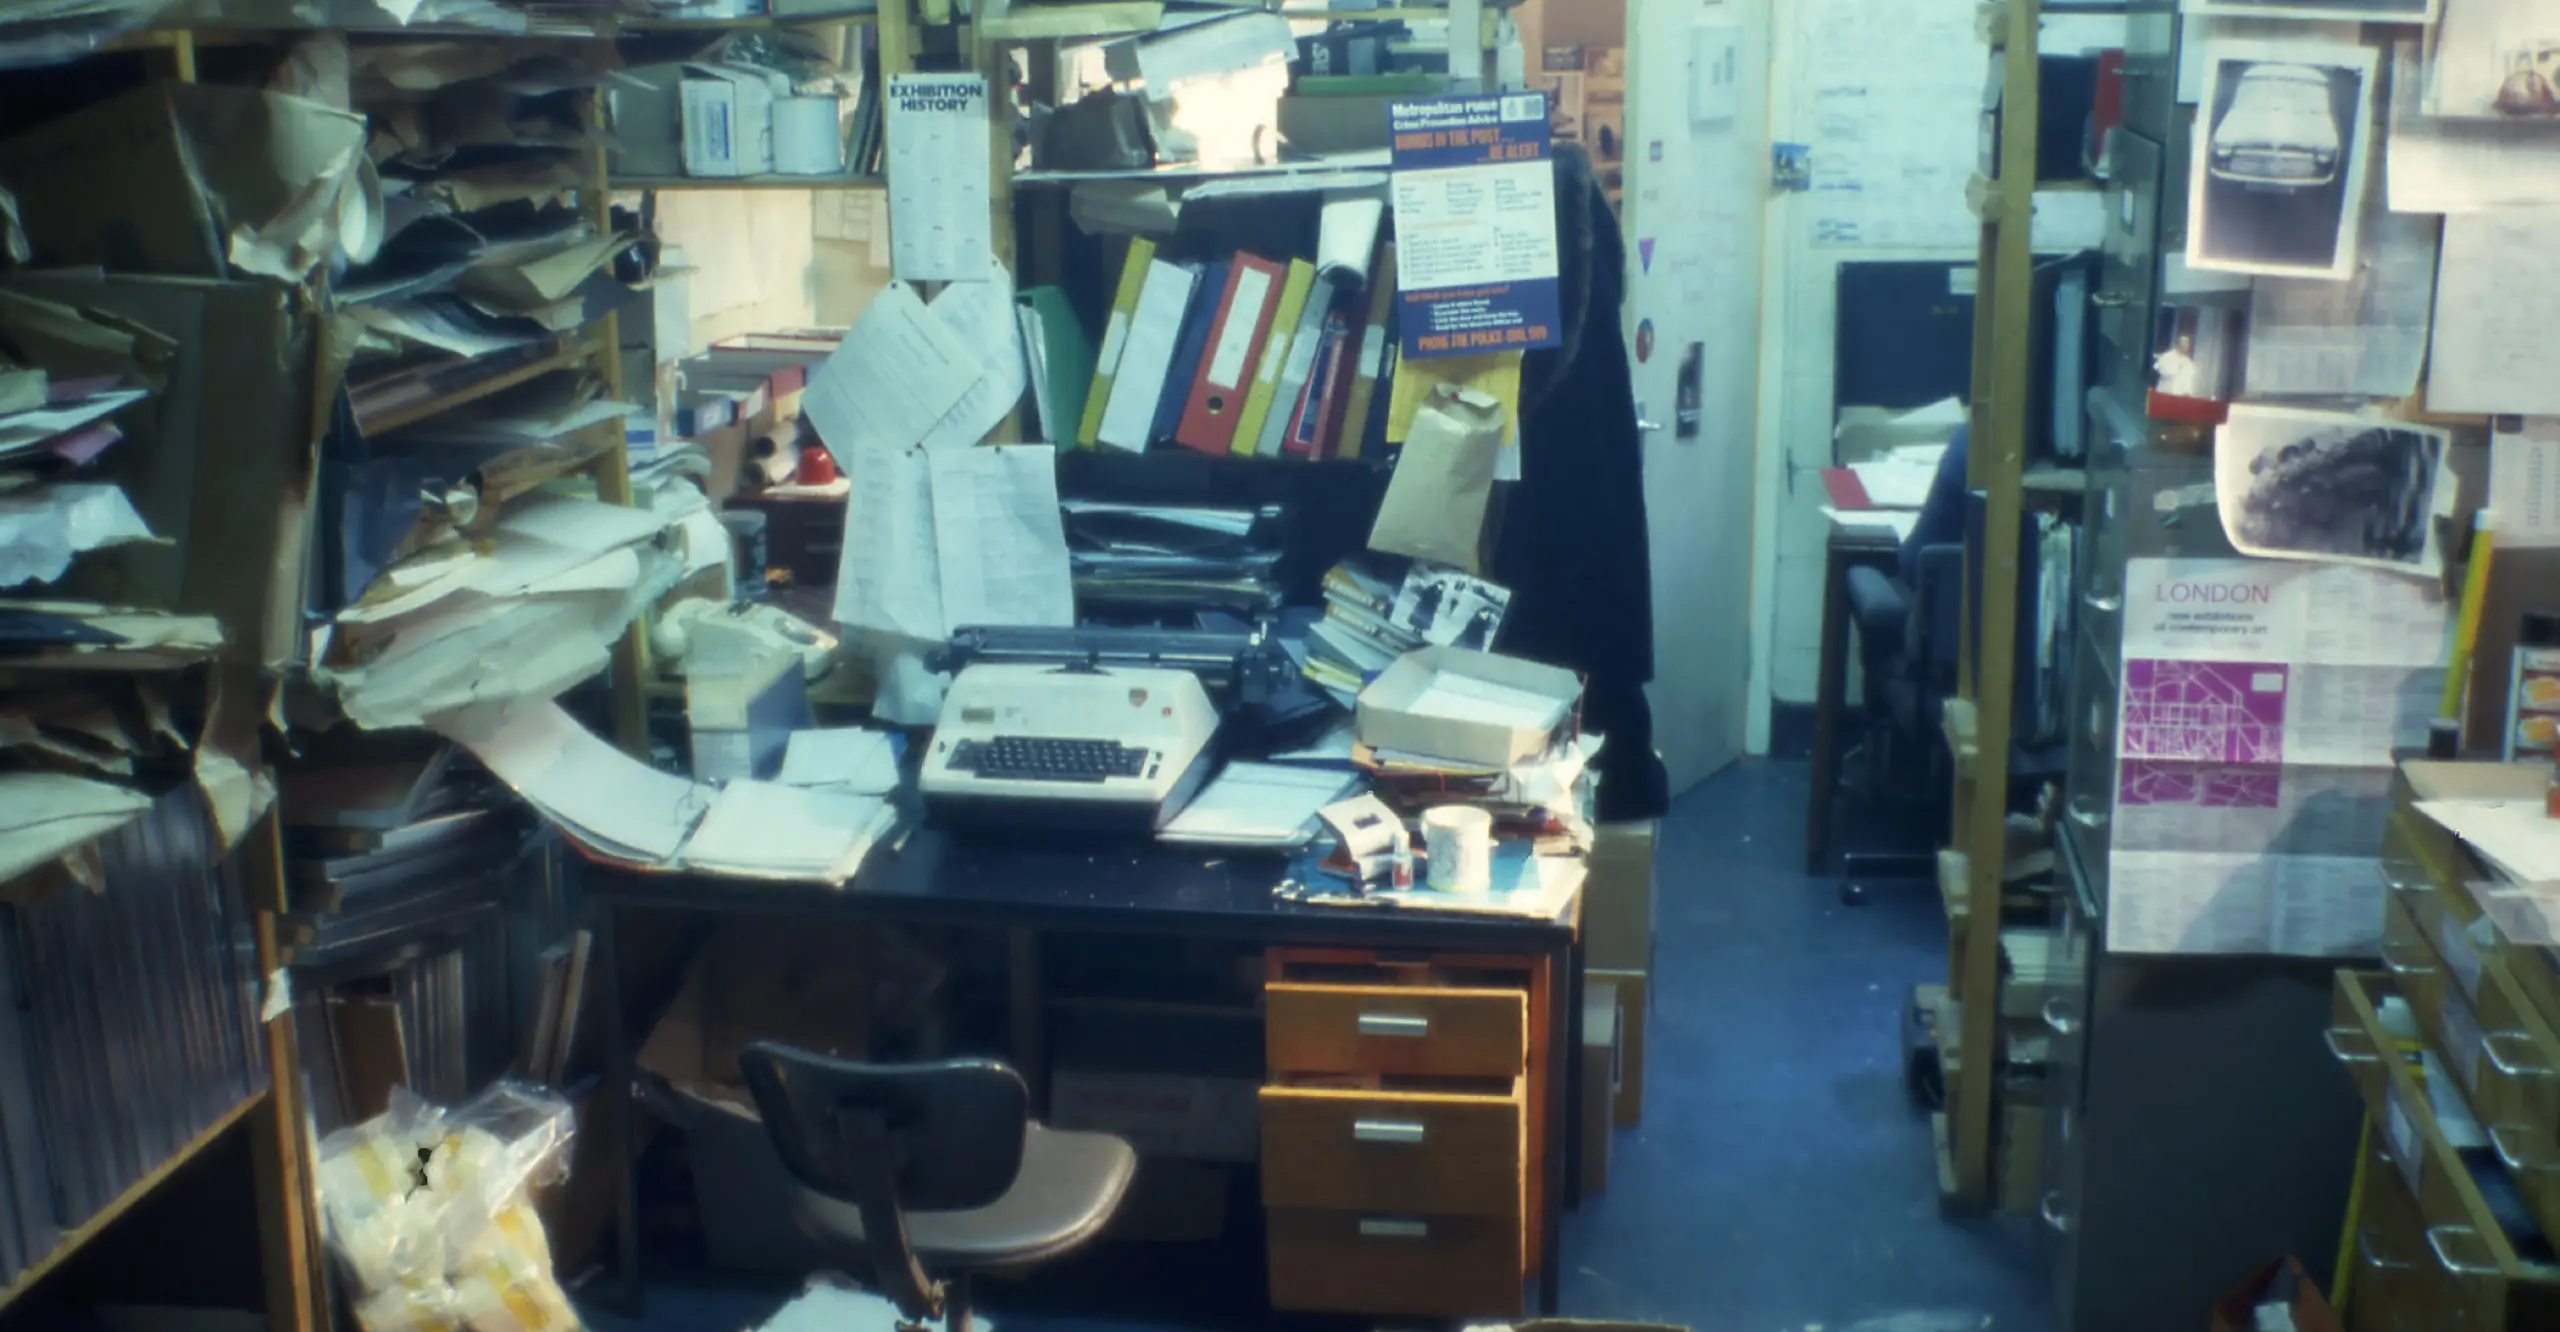 Archival full colour photograph with a desk in the middle of an office surrounded by papers, books, binders and a miscellany of other office supplies and materials